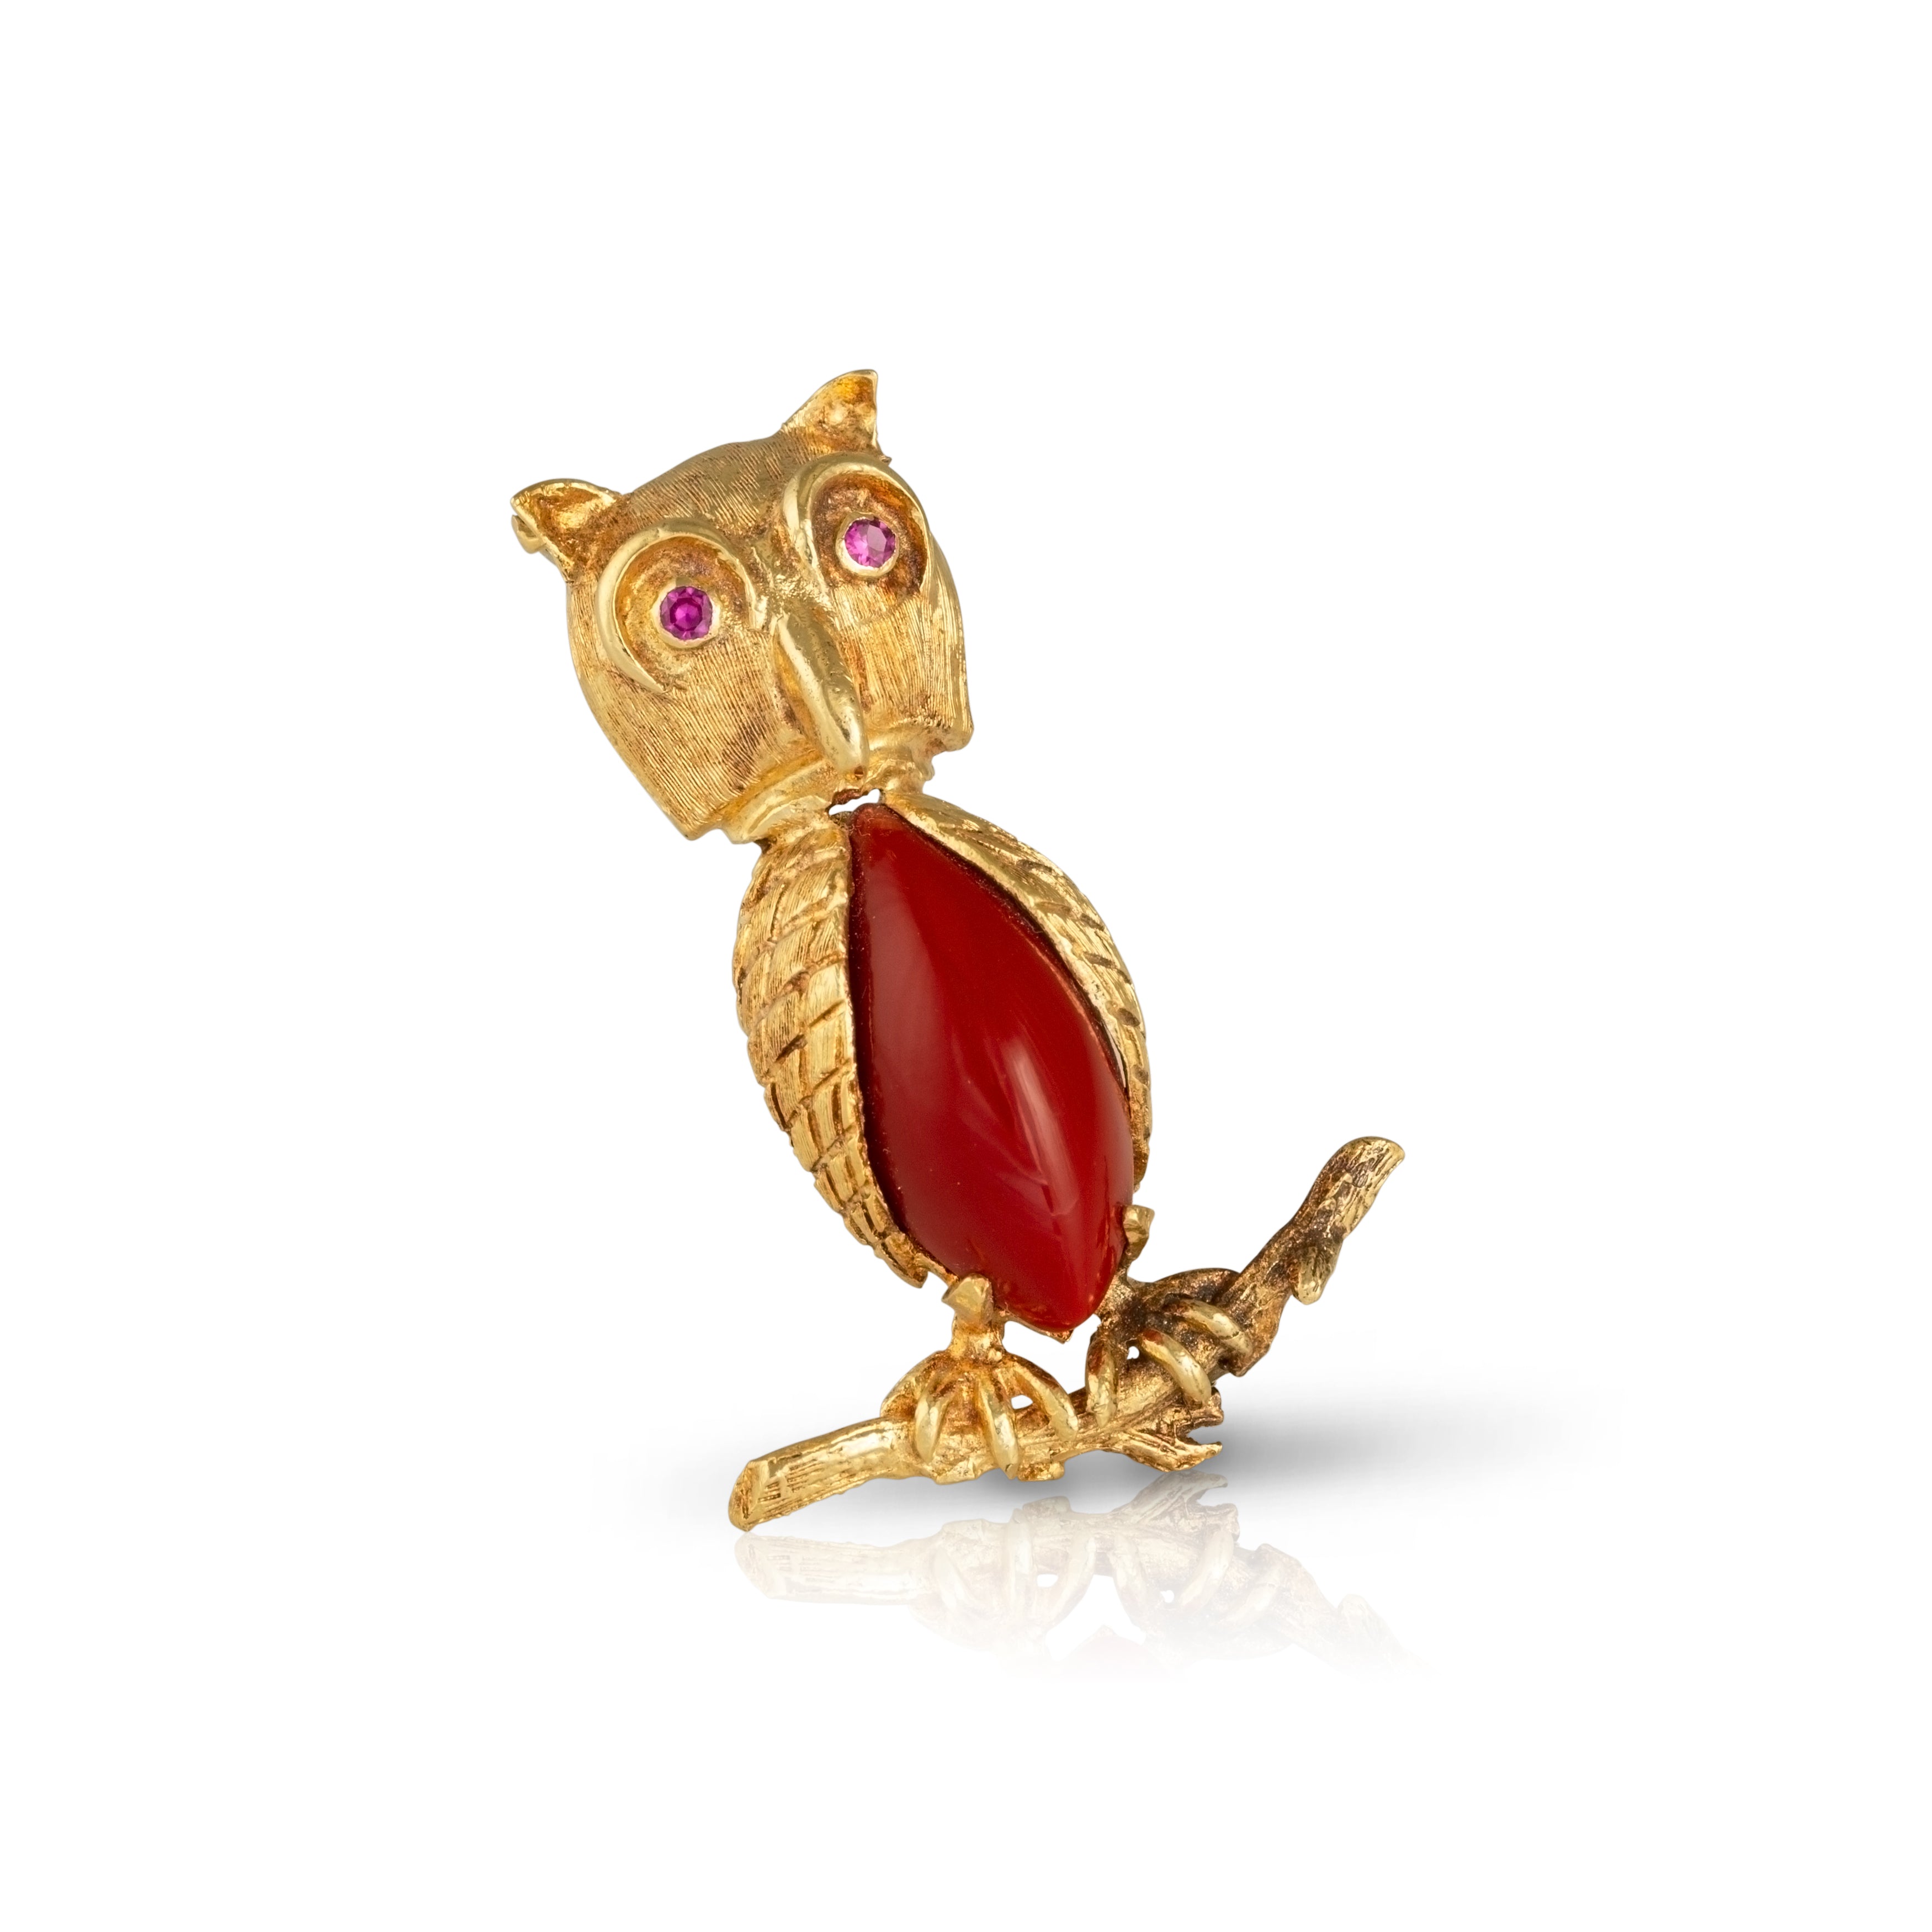 ilted gold owl brooch with red glass and rubies sitting on a branch.